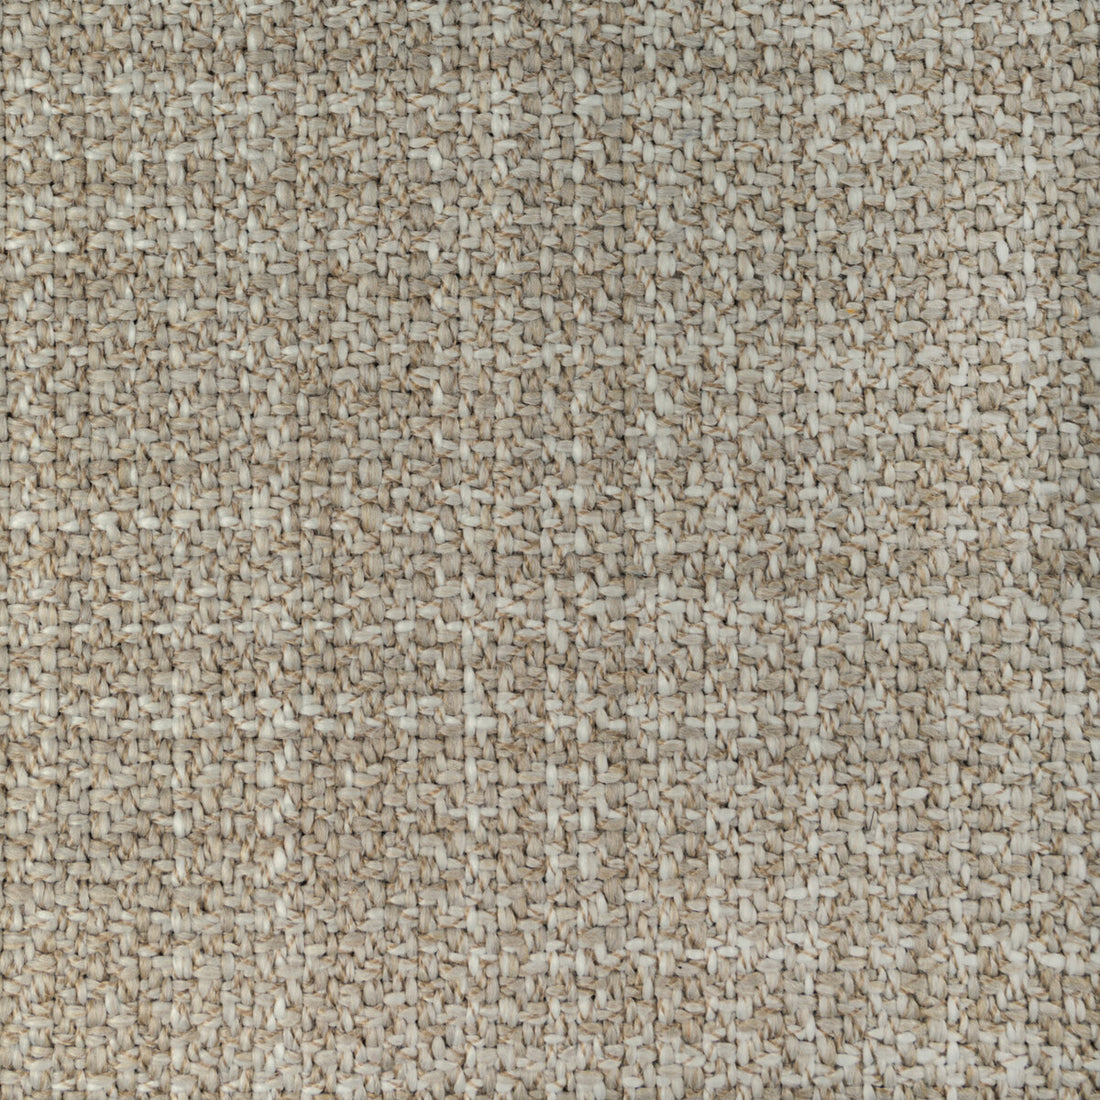 Revel Texture fabric in beige color - pattern 8020138.16.0 - by Brunschwig &amp; Fils in the En Vacances II collection